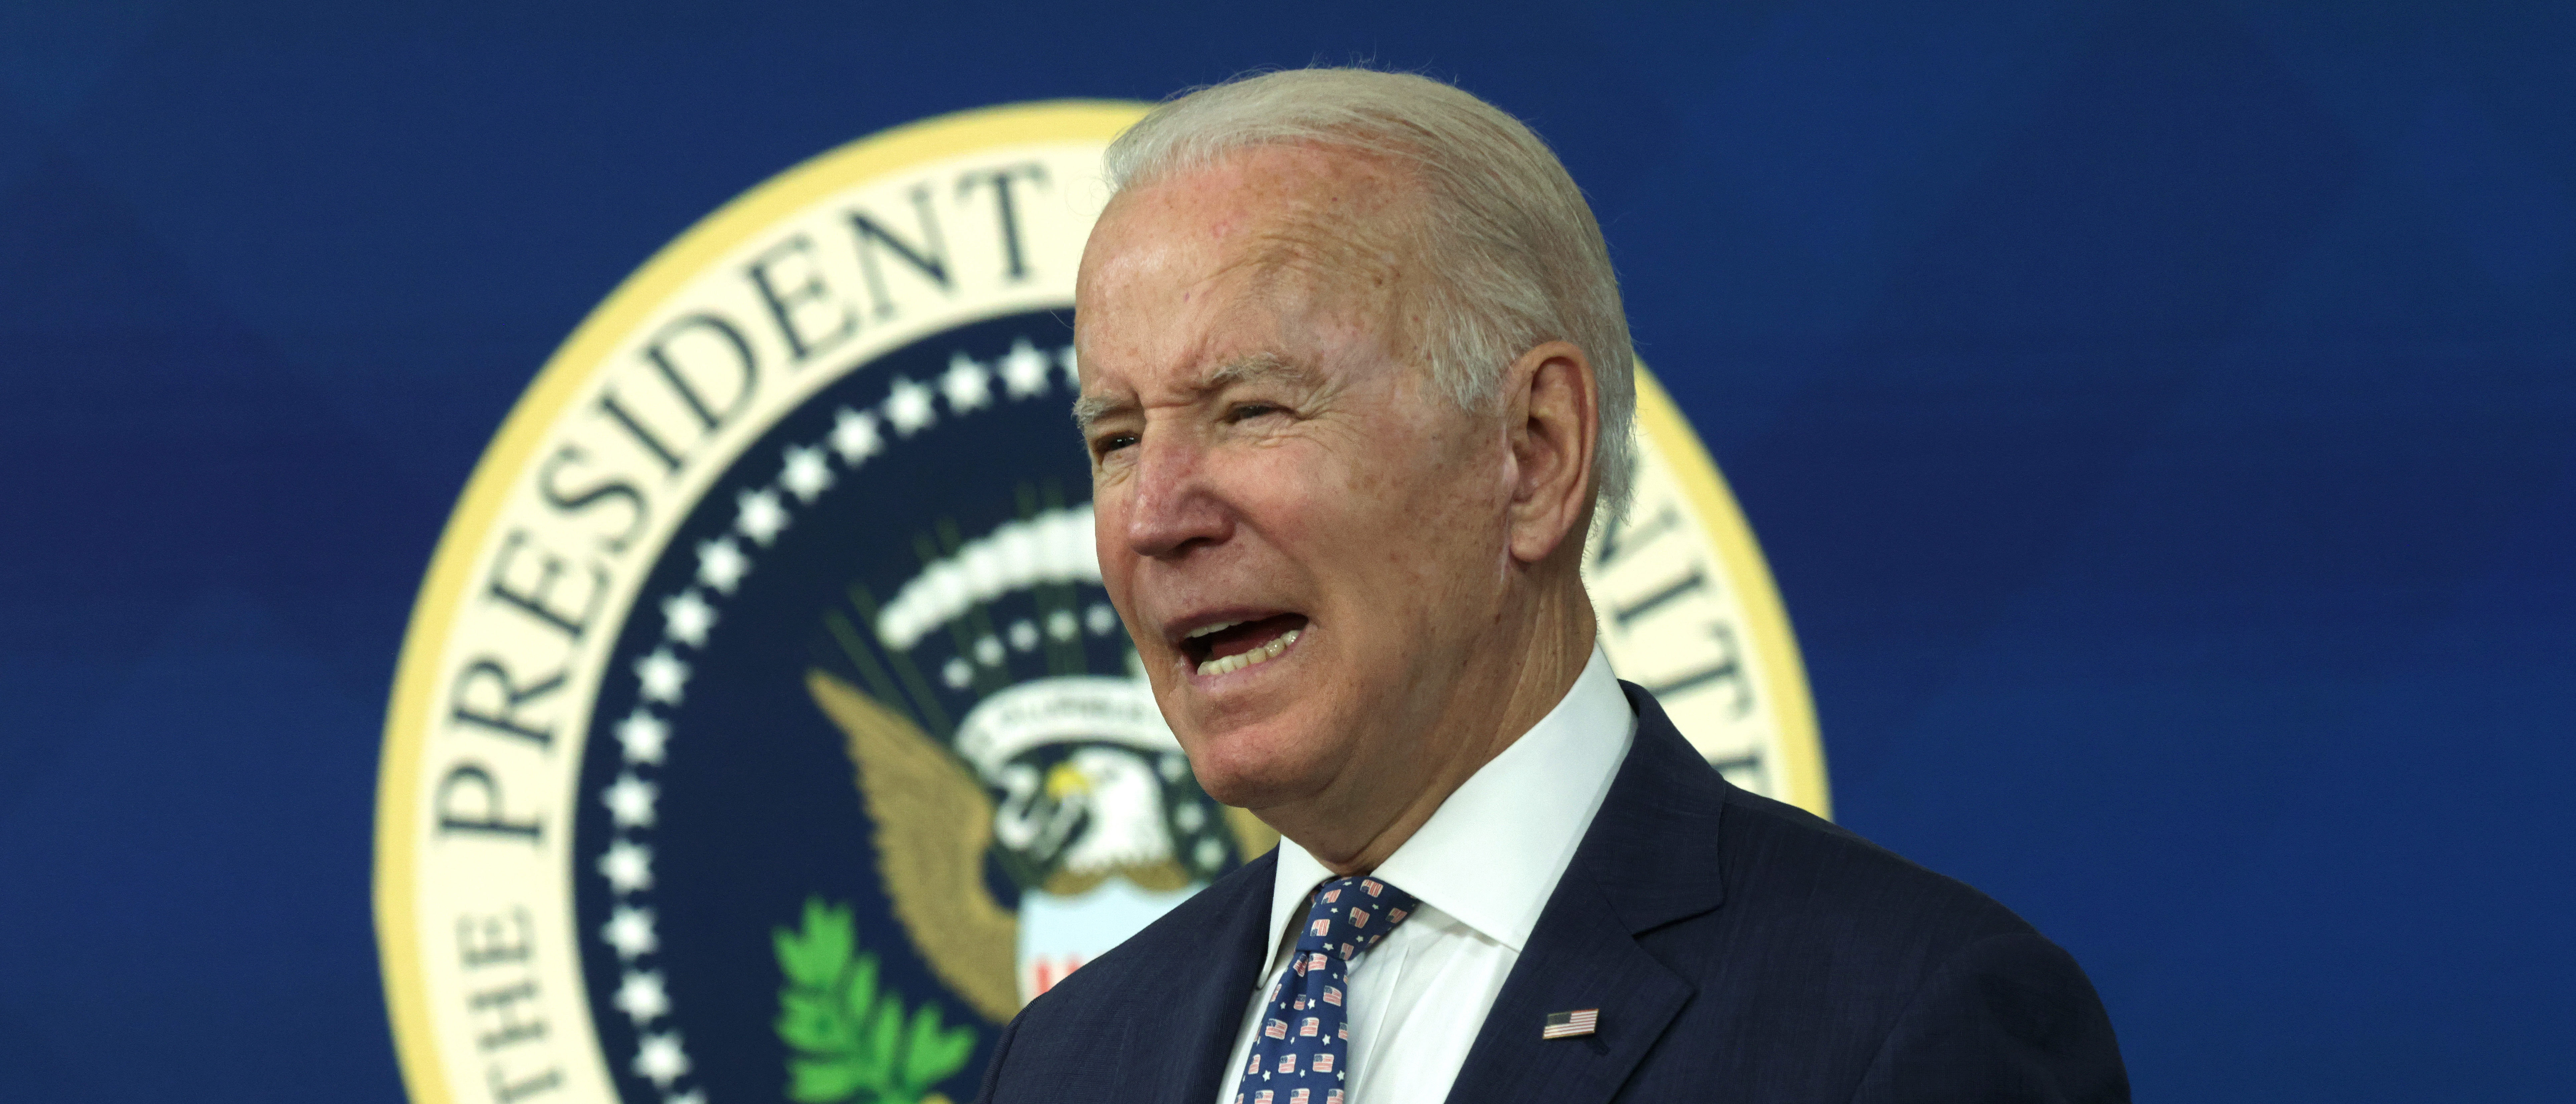 Biden Promises To Help Get Jobs For Women ‘Locked Out Of The Workforce’ By Caring For Children, Elderly